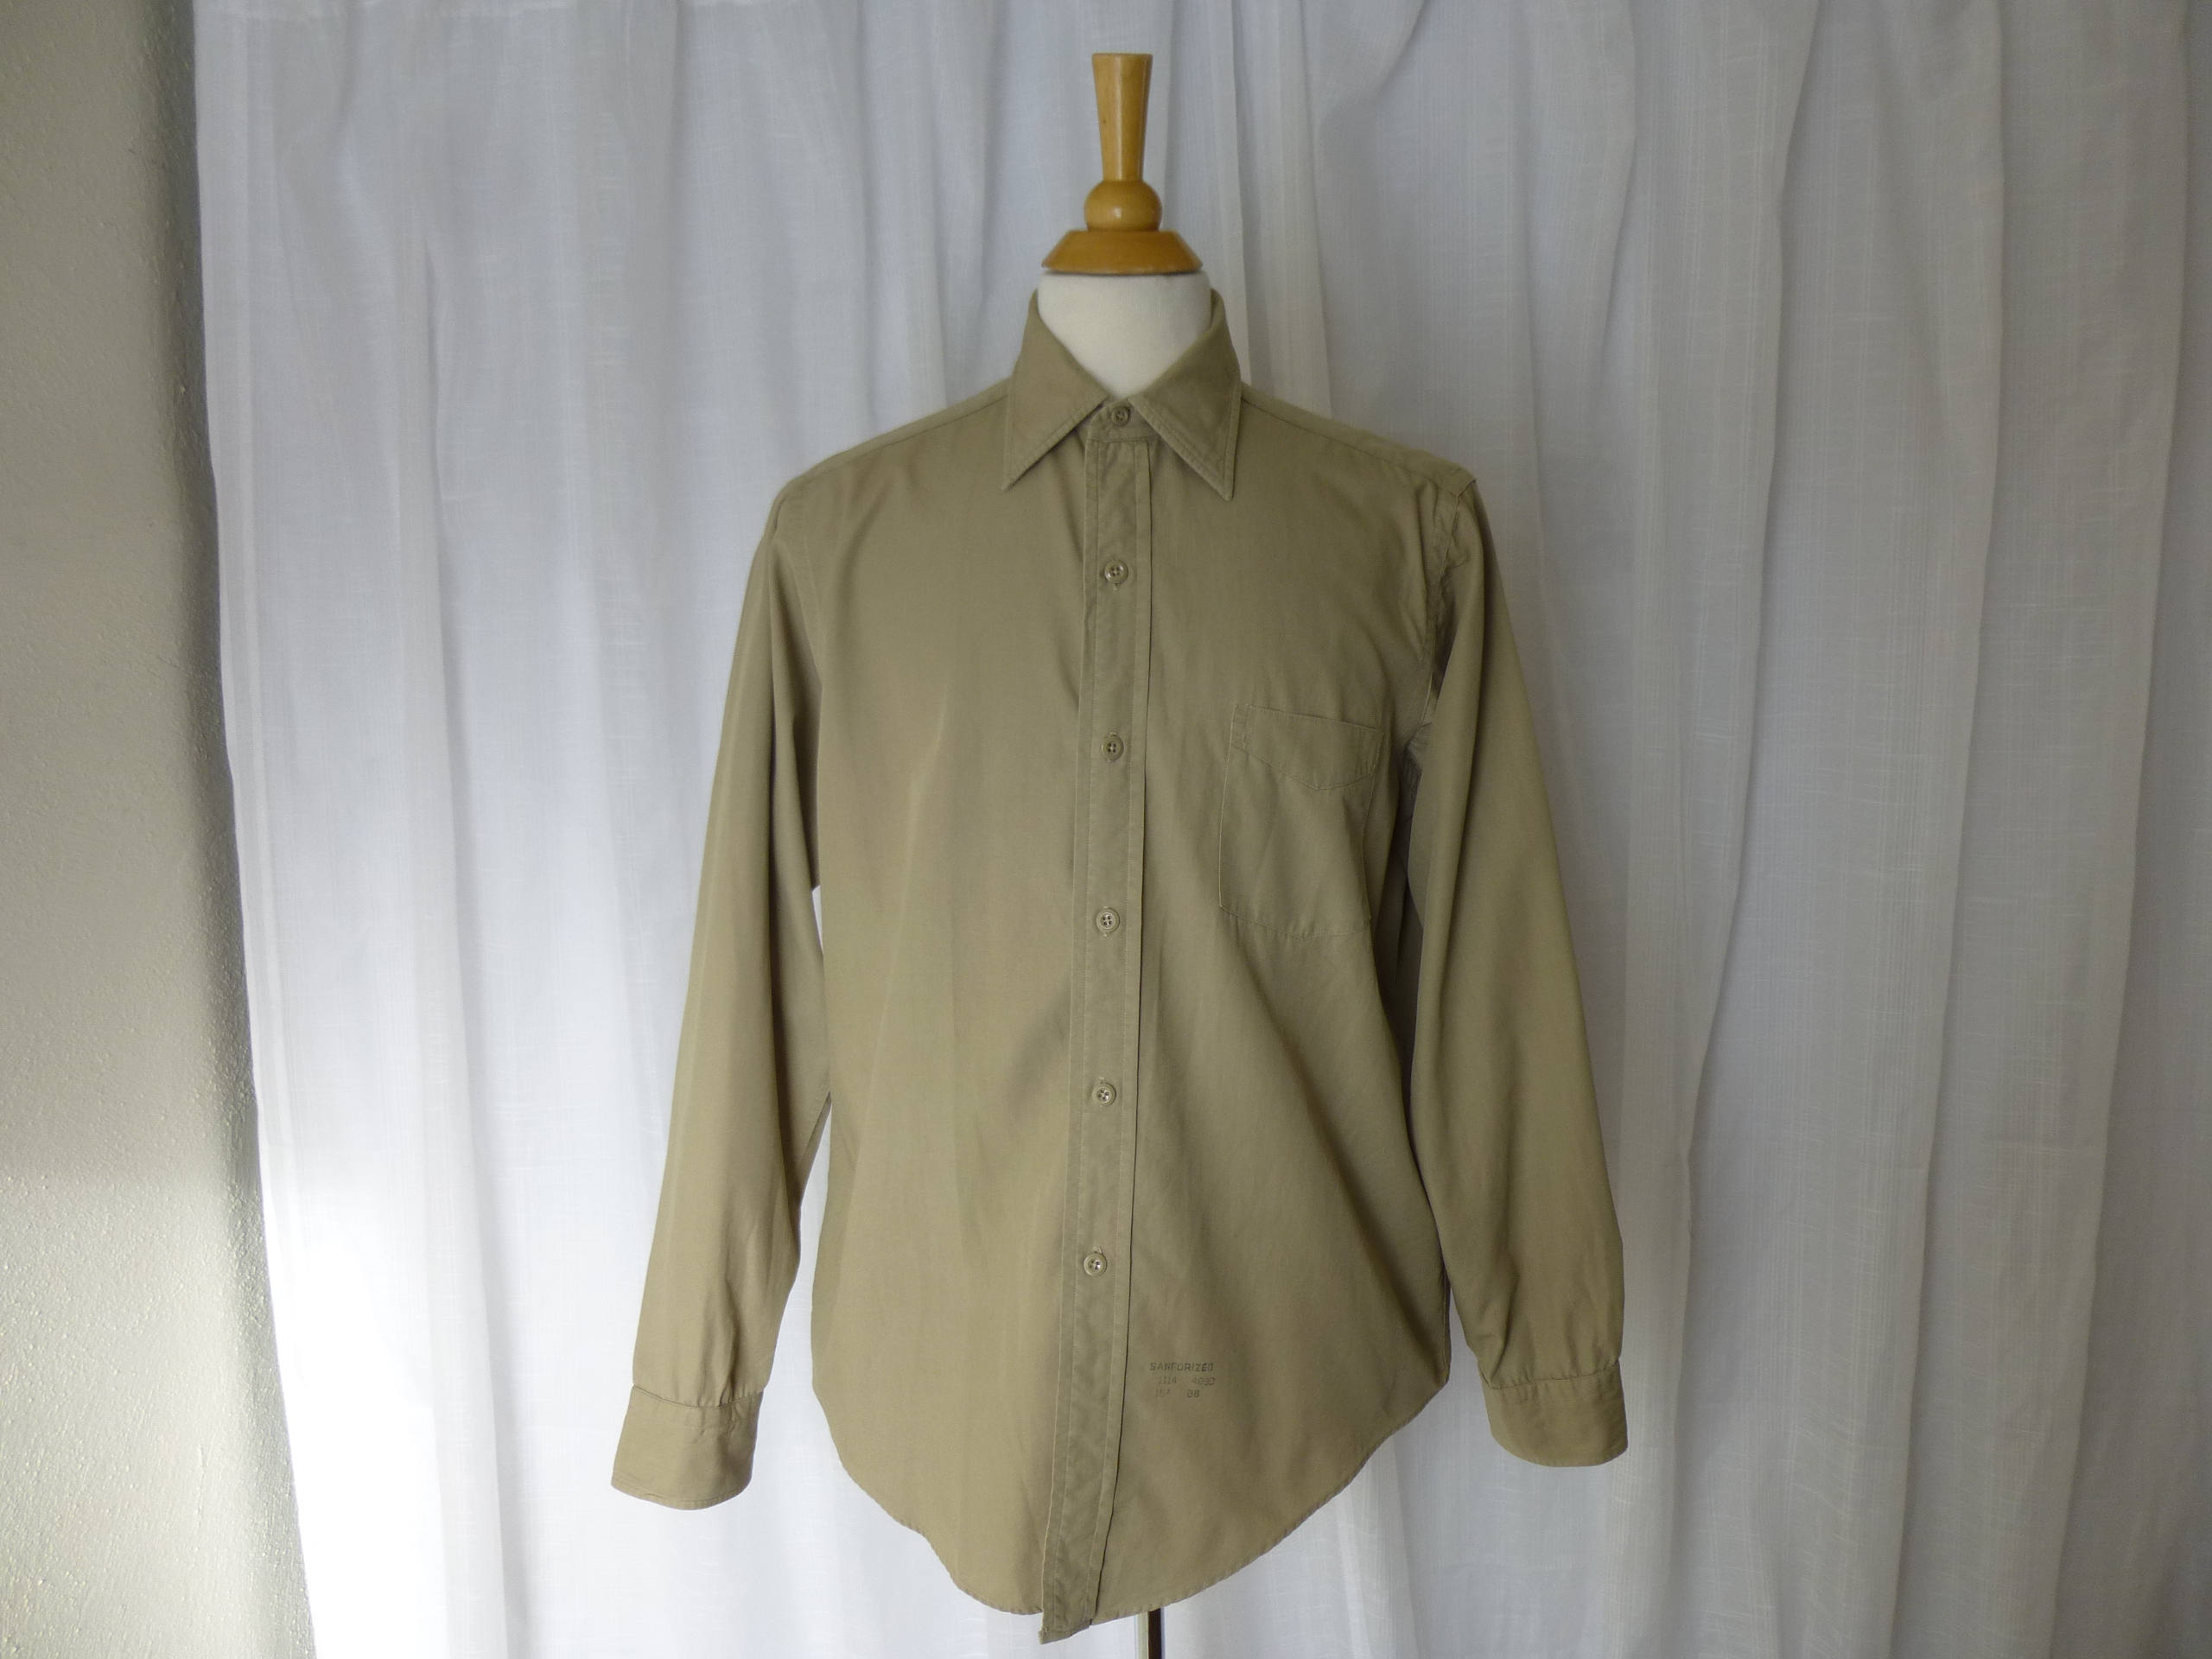 Vintage 60s Flying Cross Military Cotton Shirt M Beige Taupe